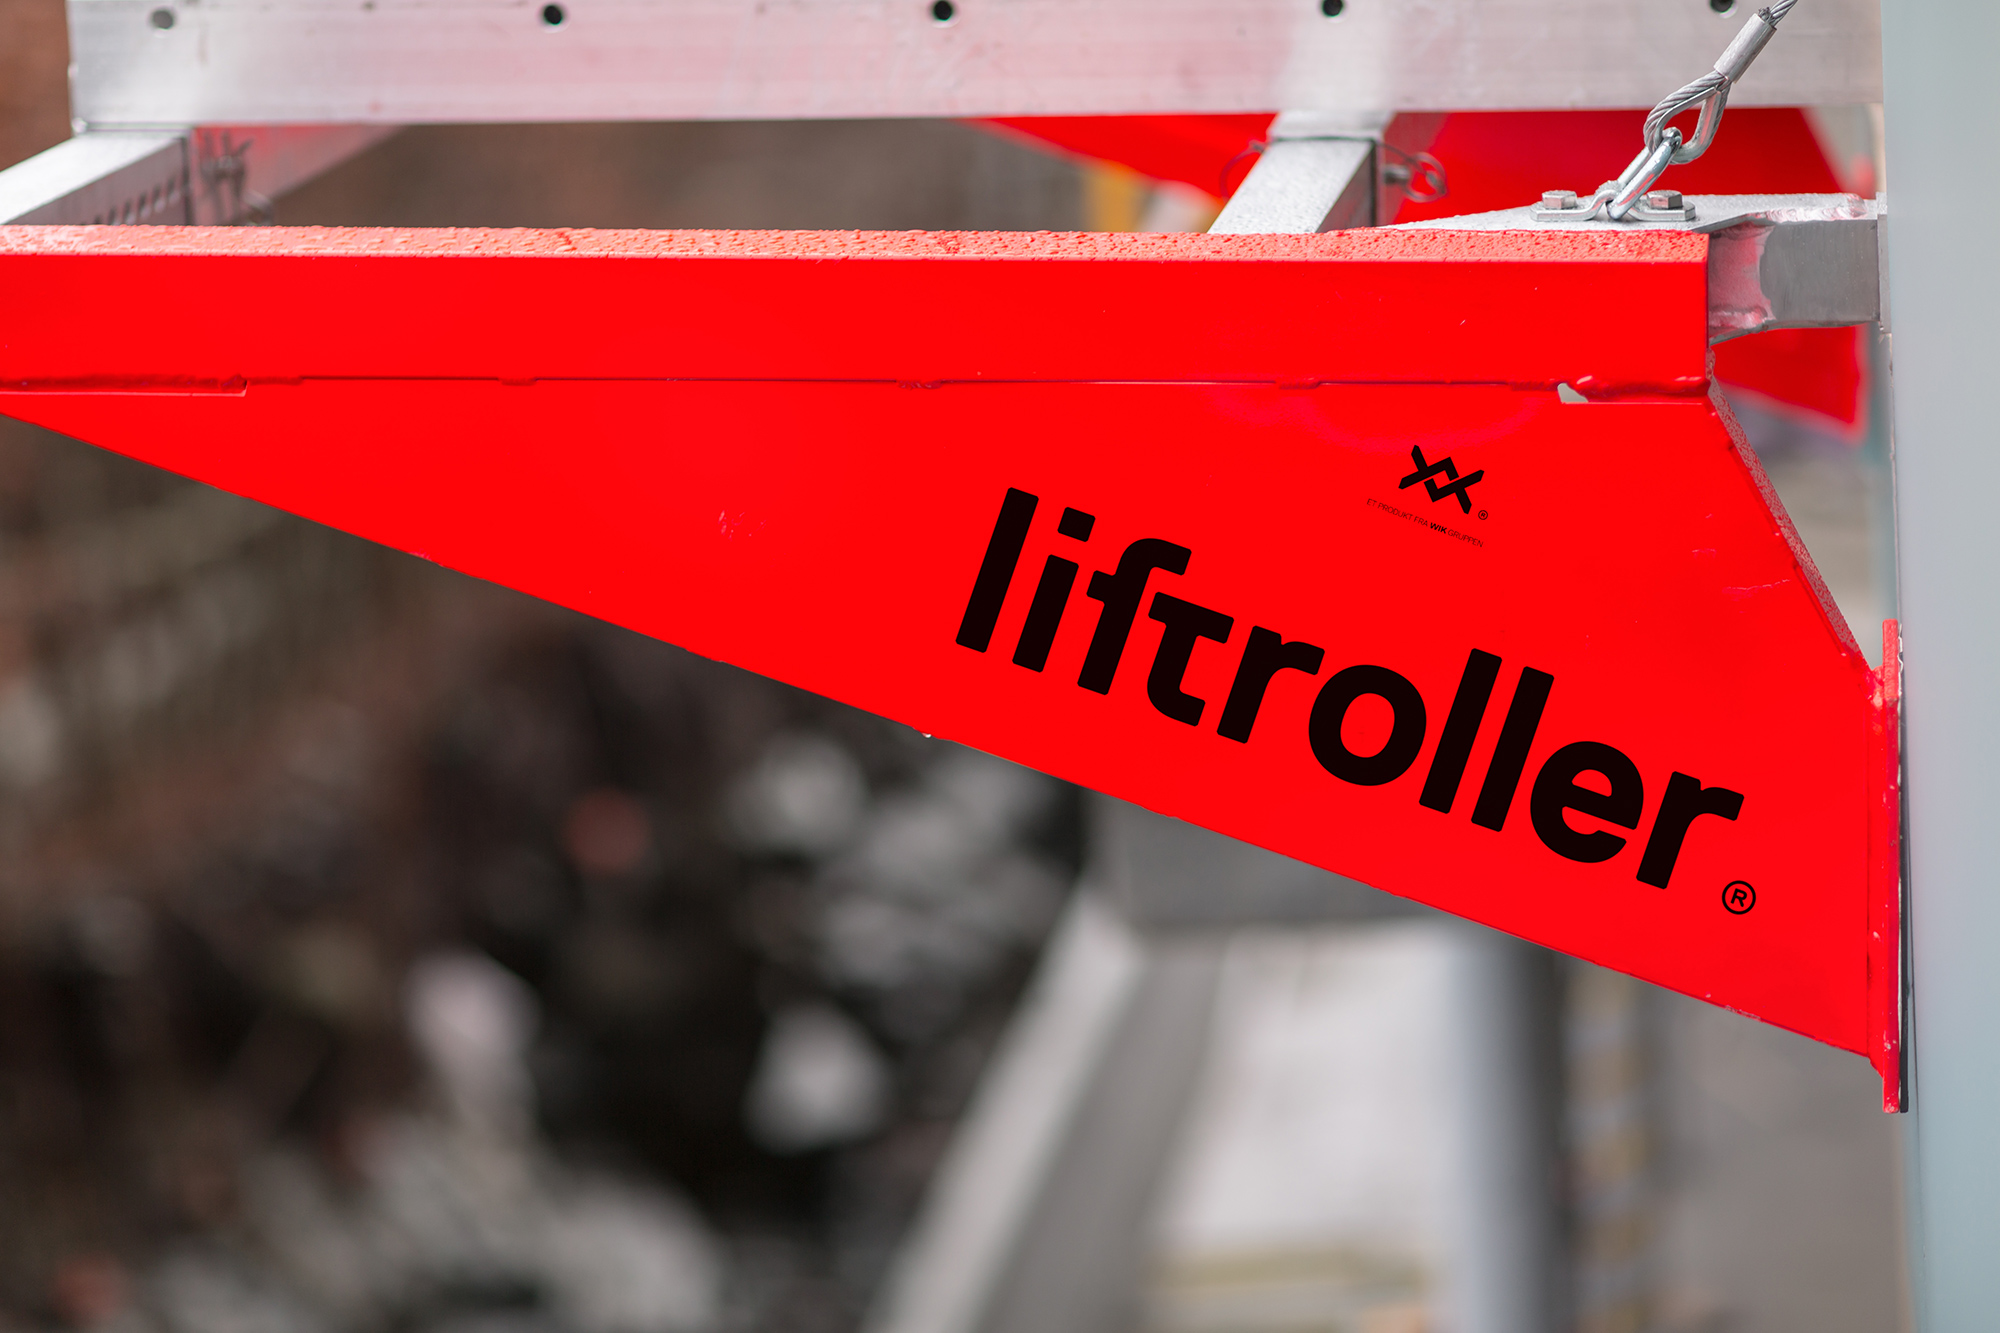 Liftroller® named invention of the year’